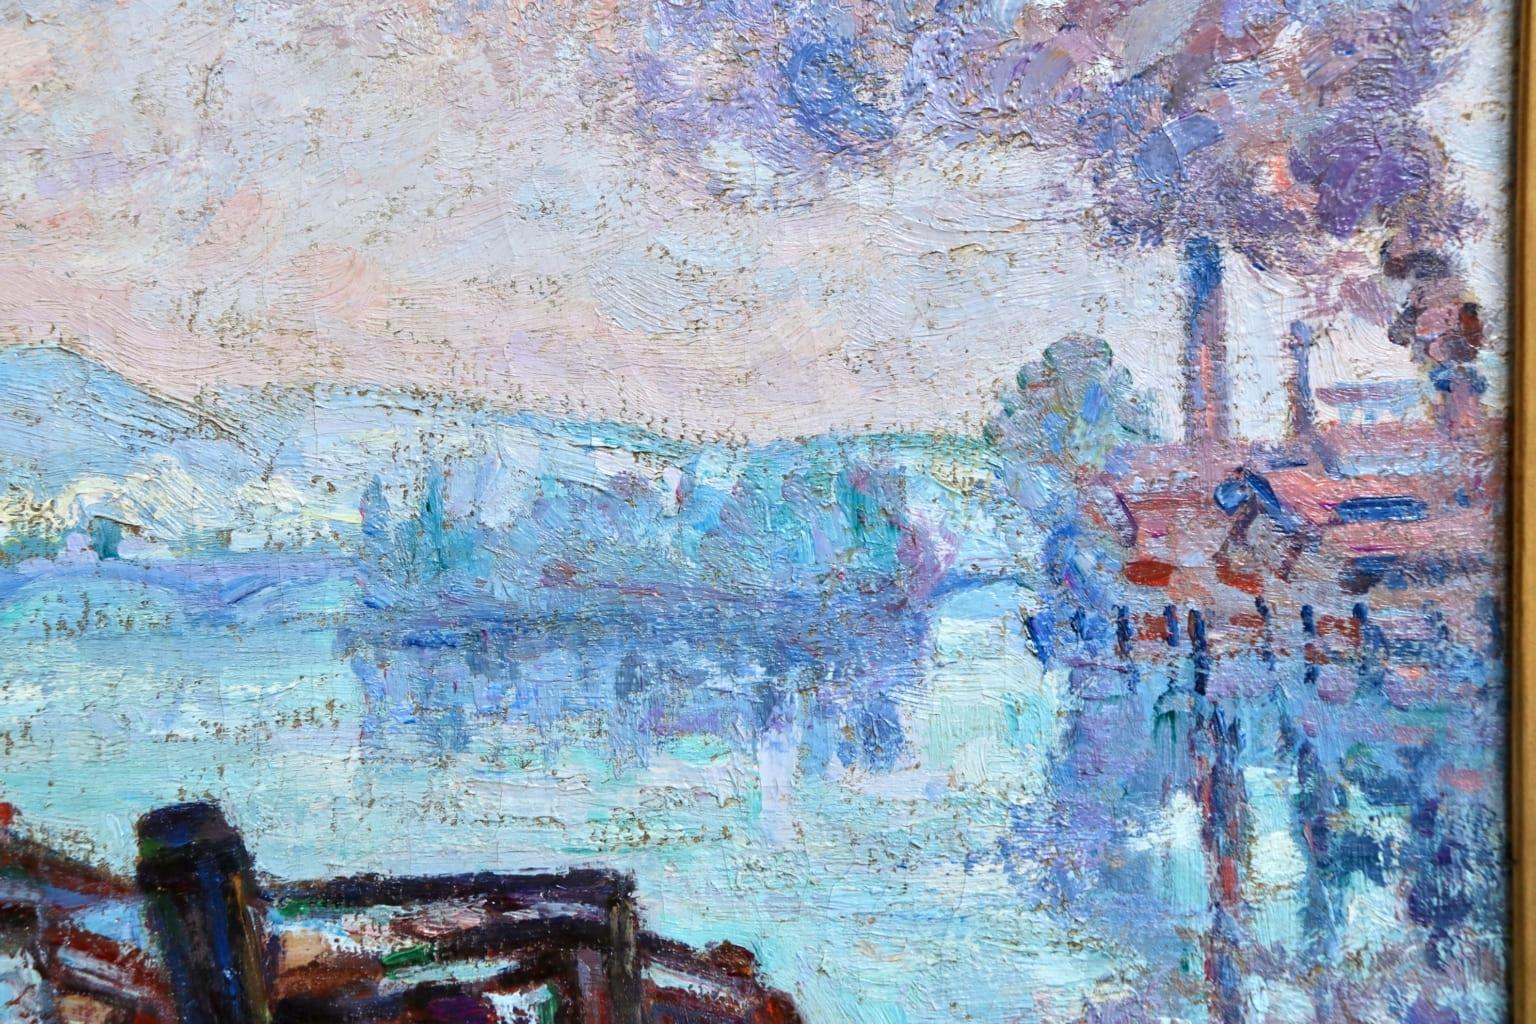 Morning Rouen - Impressionist Oil, Boats on River Landscape by Armand Guillaumin 1